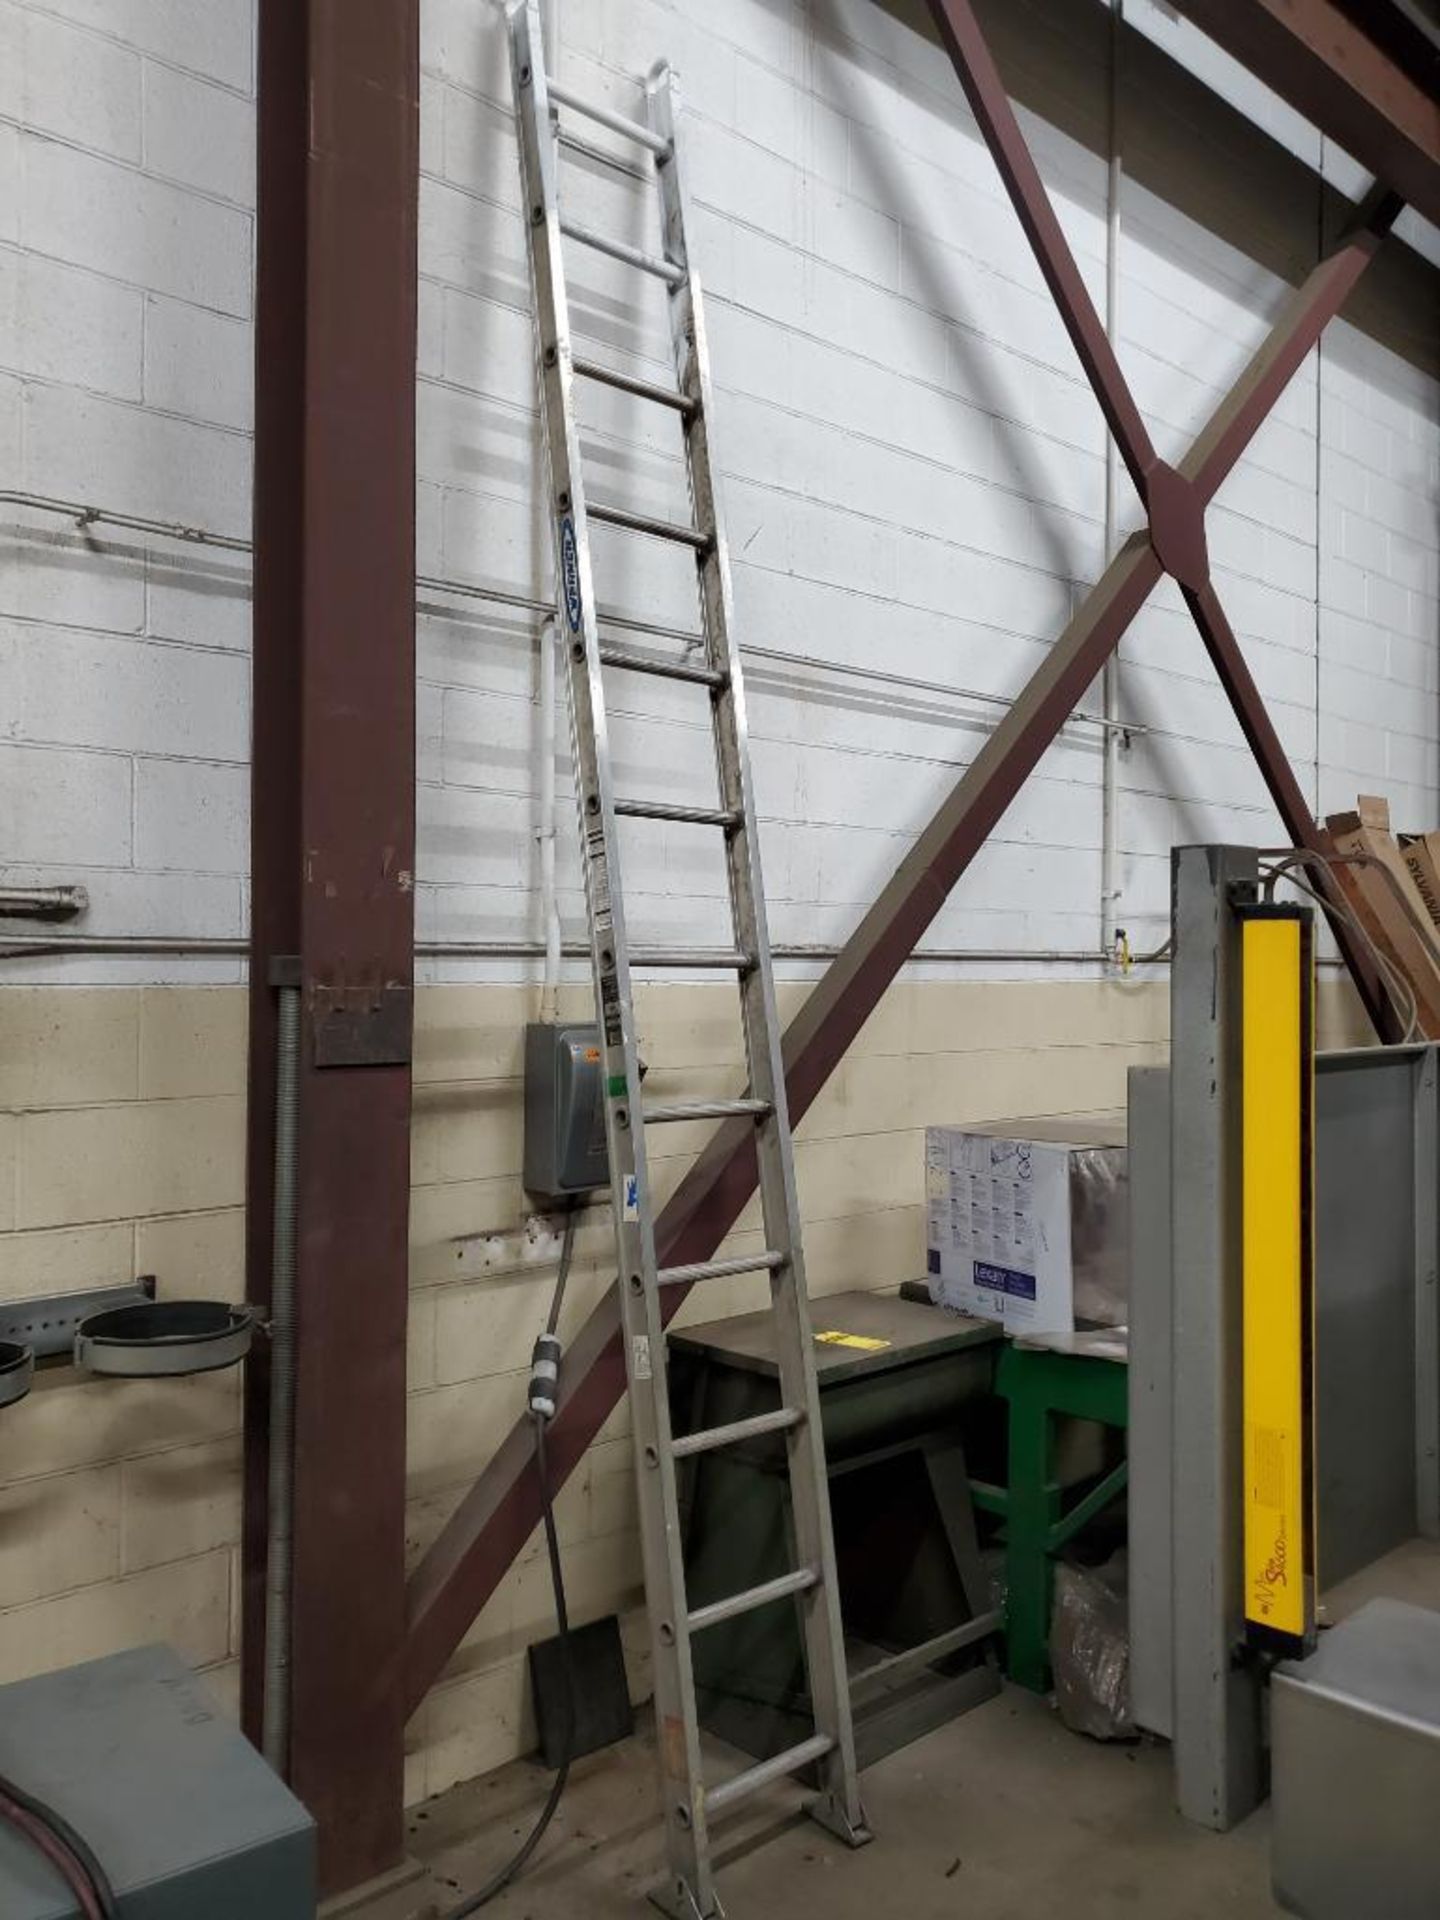 (2) Fiberglass Step Ladders, 6'/4', Aluminum Ladder from Extension, Wood Step Ladders - Image 3 of 6